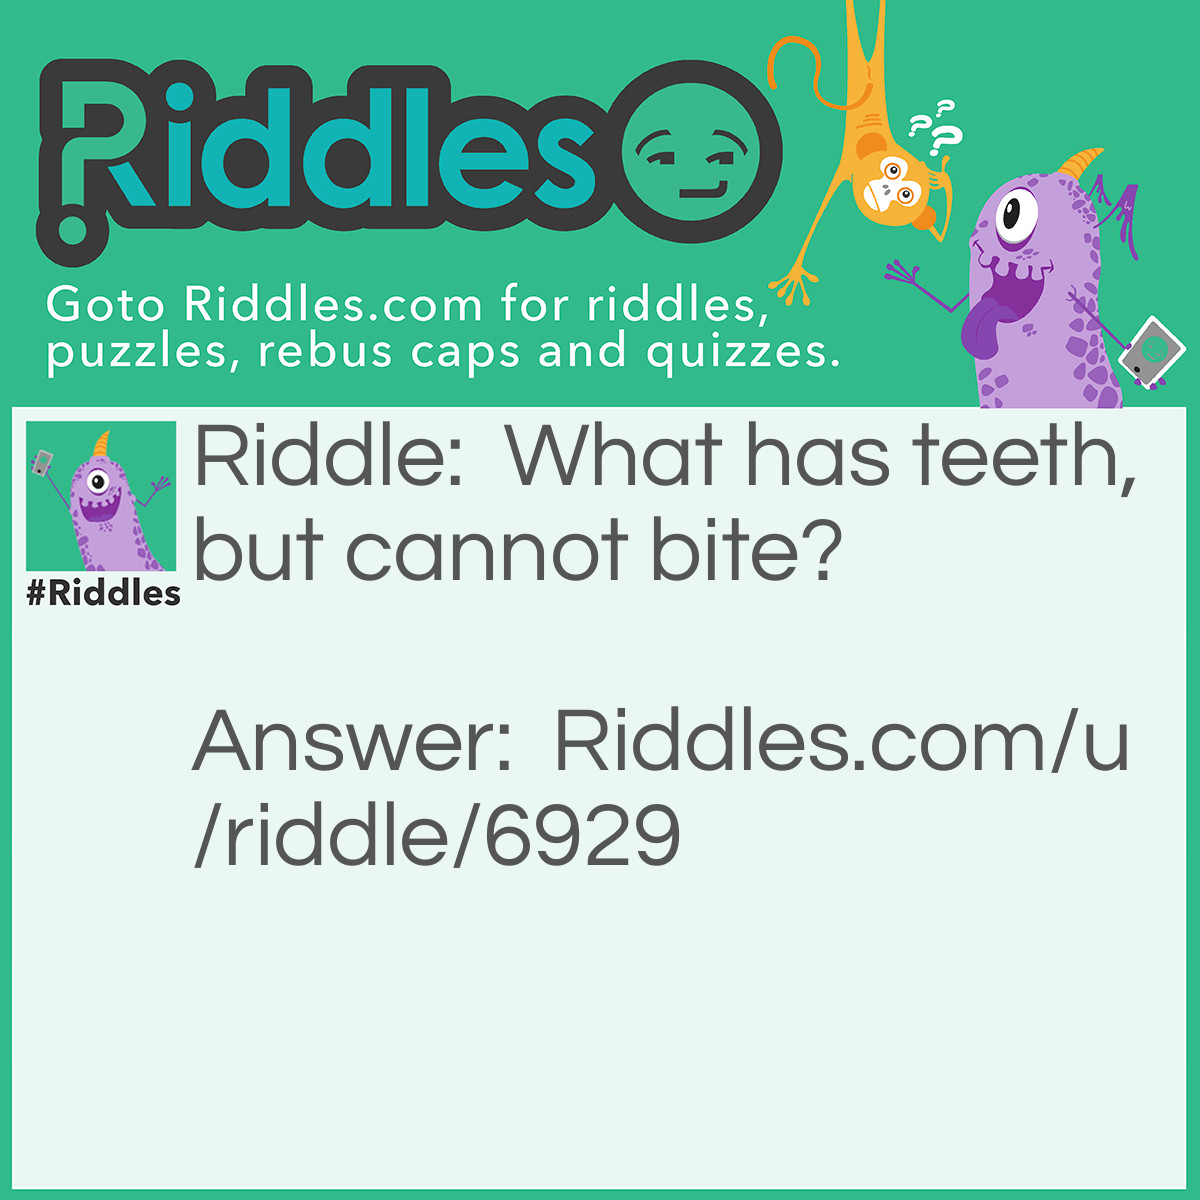 Riddle: What has teeth, but cannot bite? Answer: A comb.